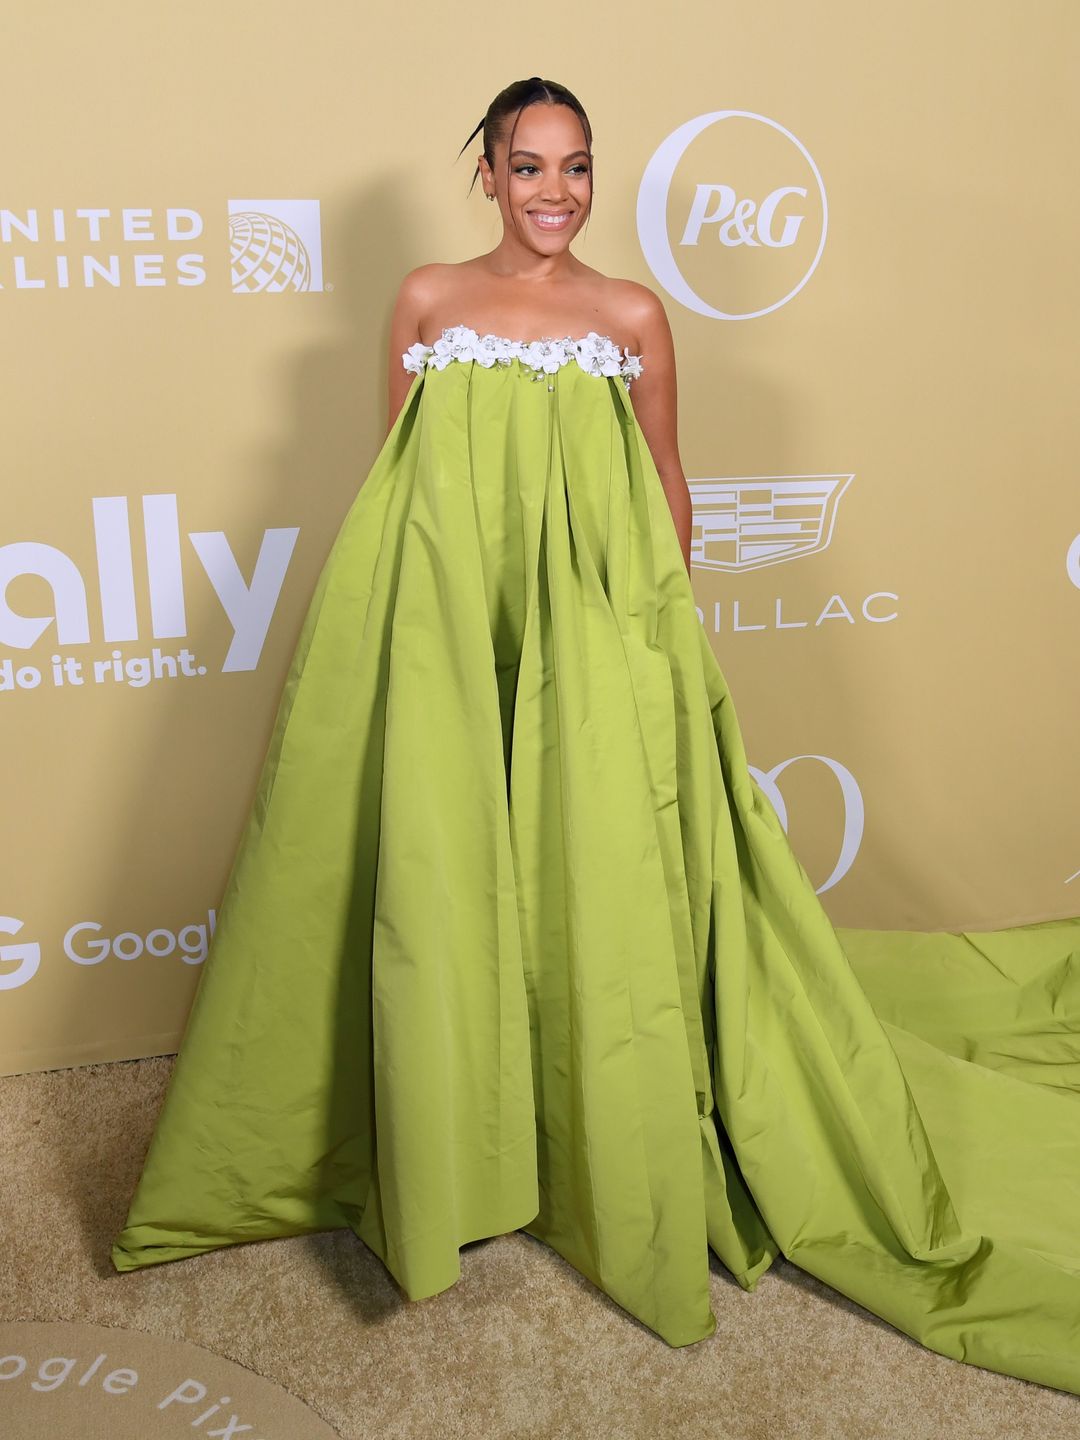 Bianca smiling in a long green dress on a red carpet